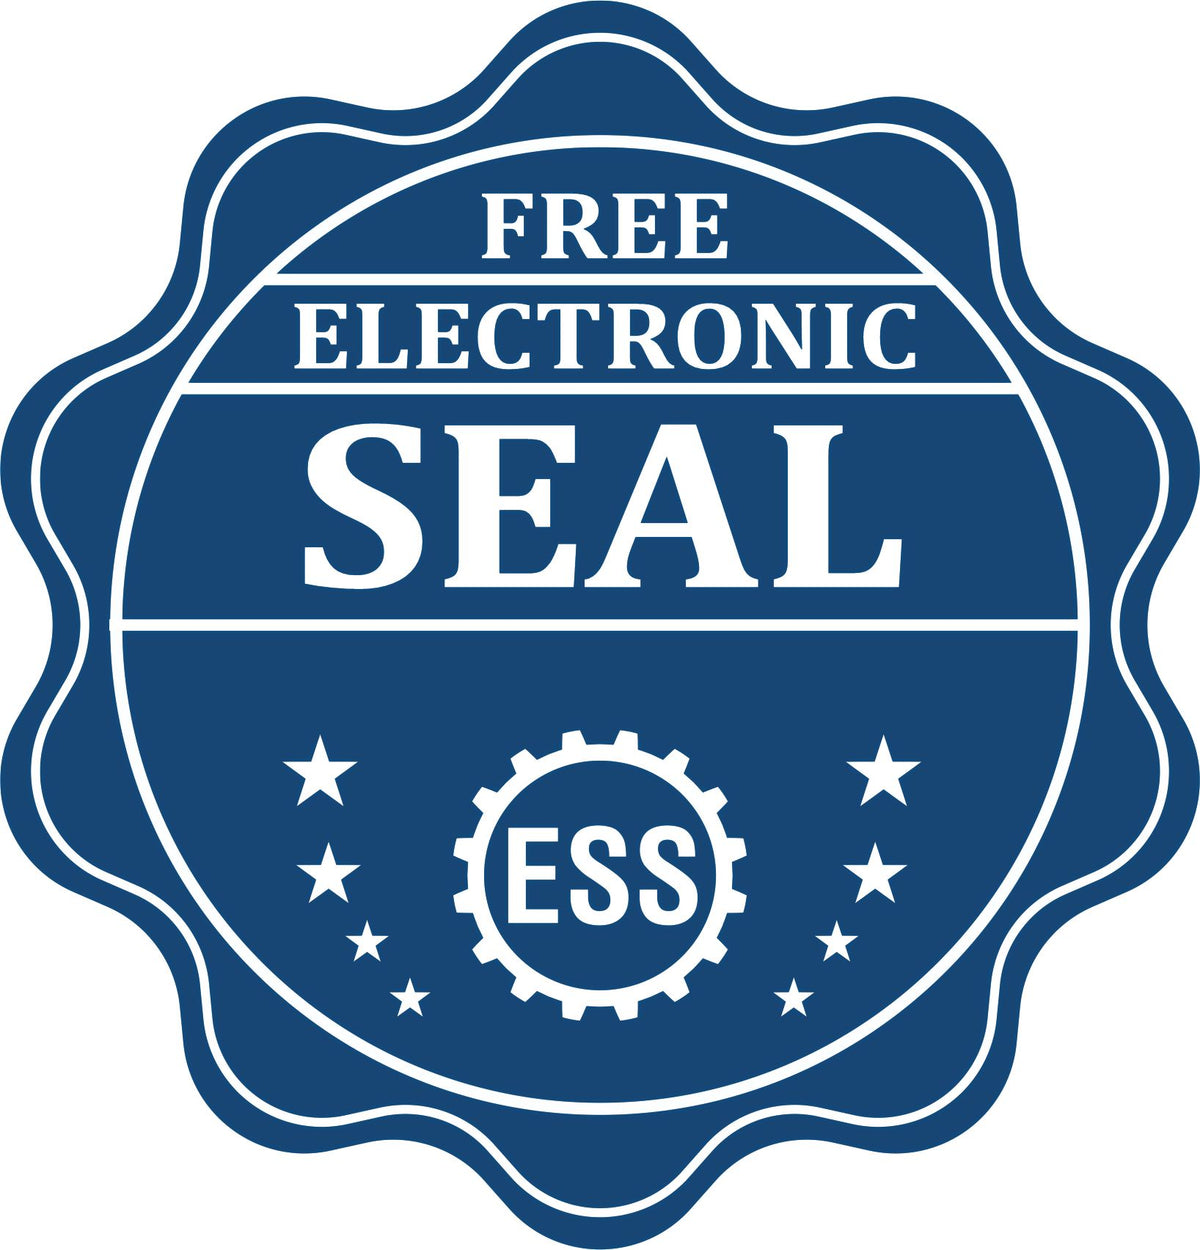 A badge showing a free electronic seal for the Slim Pre-Inked Mississippi Professional Geologist Seal Stamp with stars and the ESS gear on the emblem.